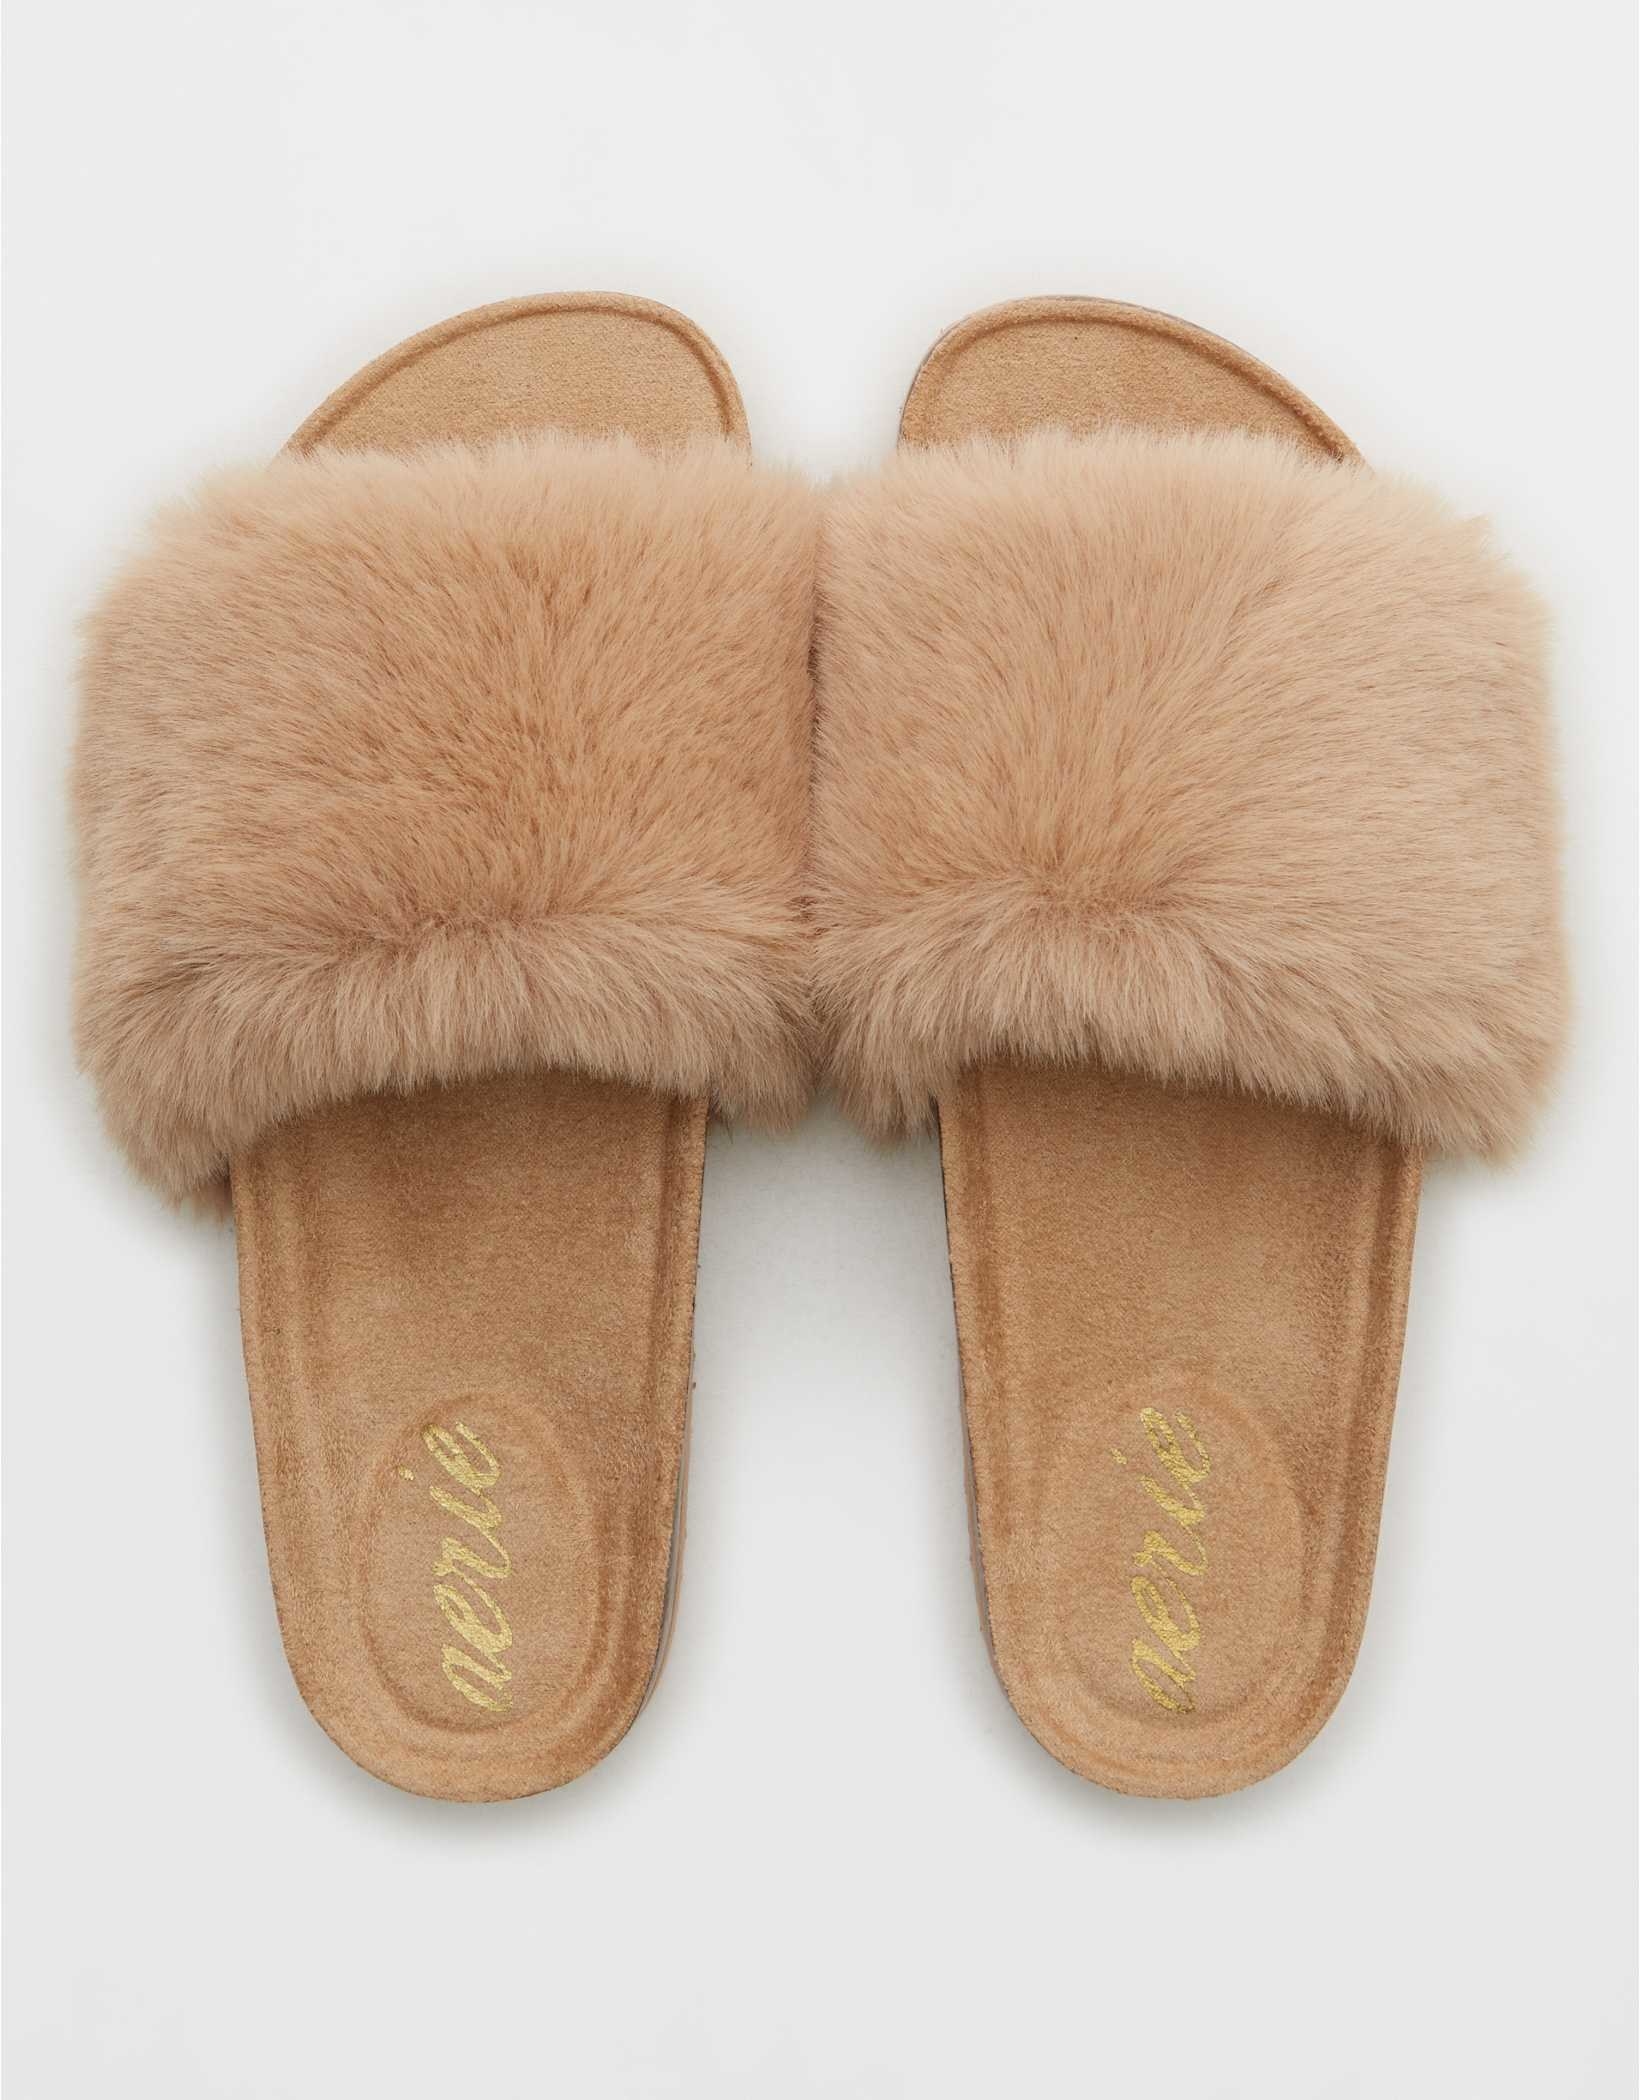 open-toe slides with tan faux fur tops